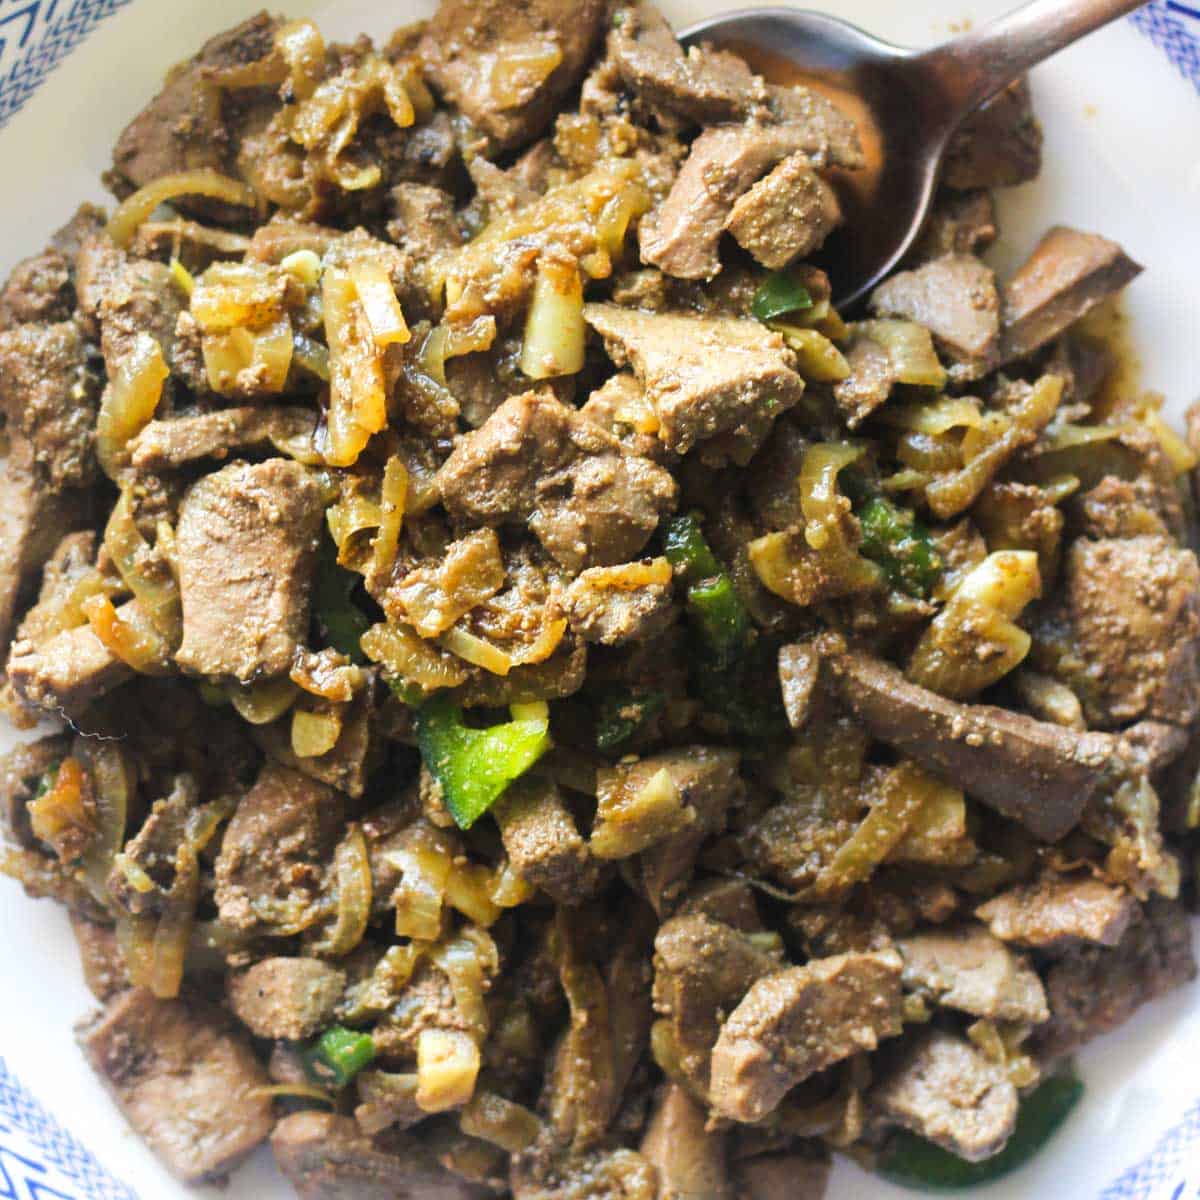 chopped meat dish with onions